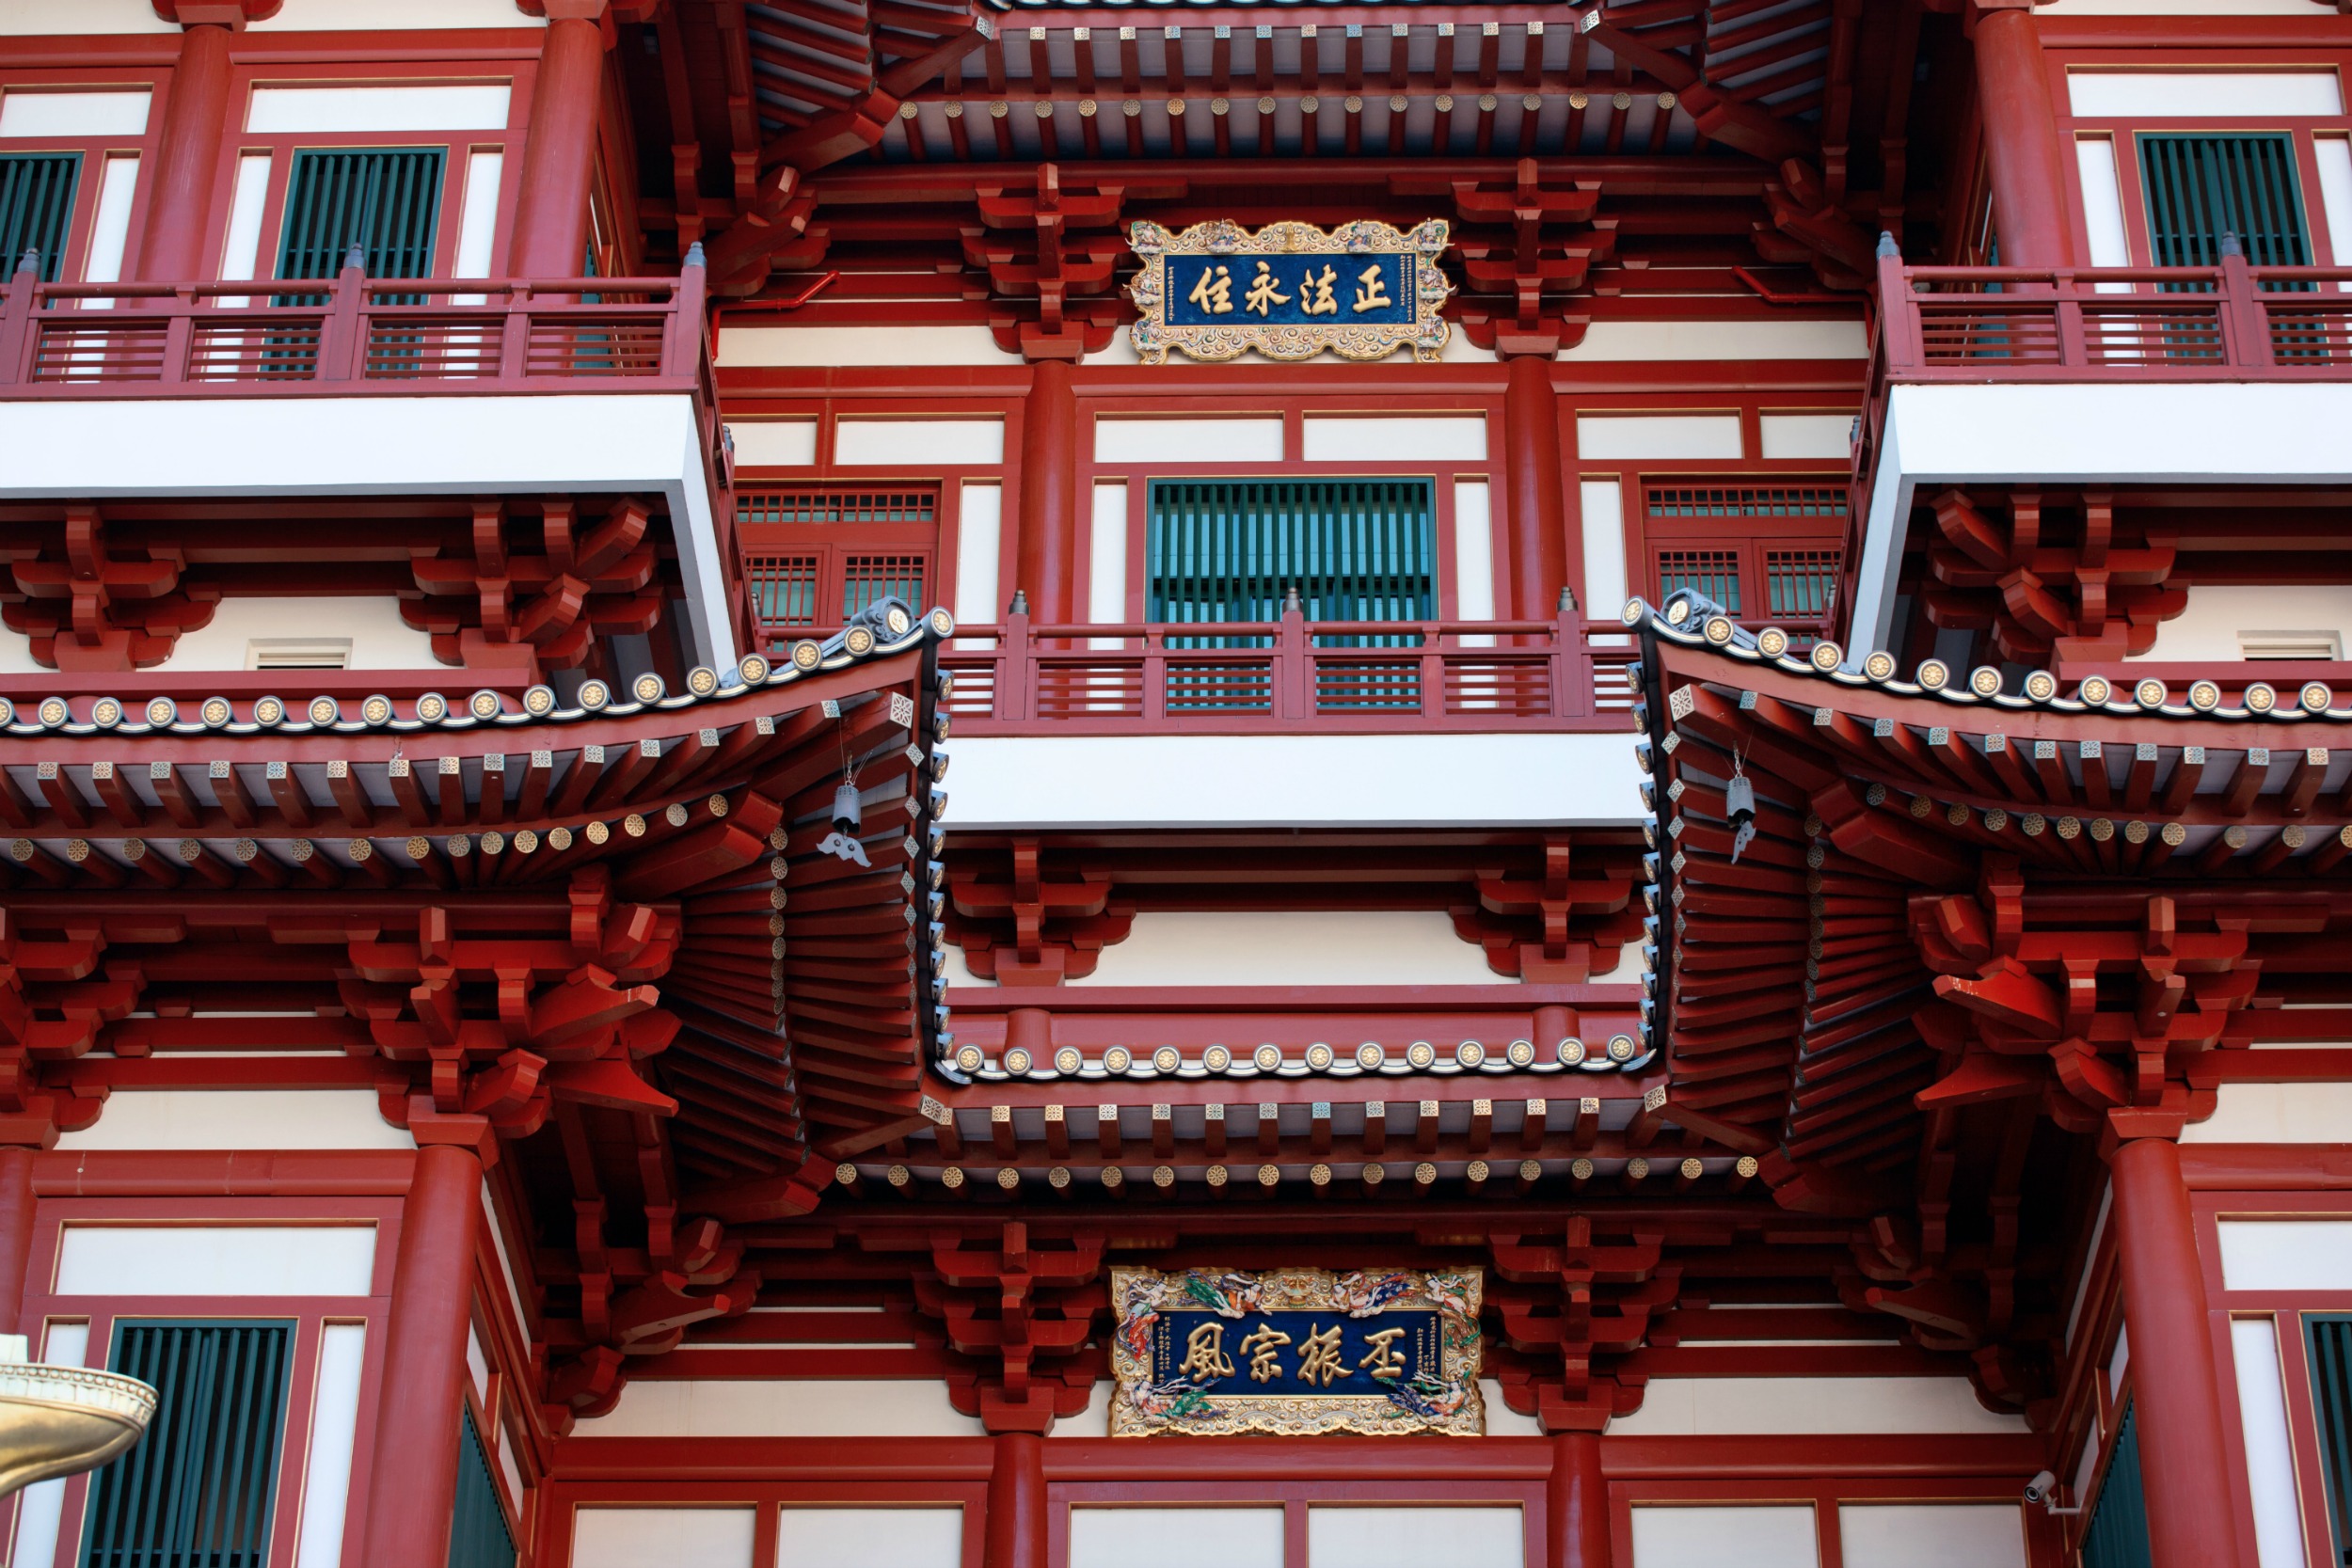 Front shot of the Buddha Tooth Relic Temple in Chinatown